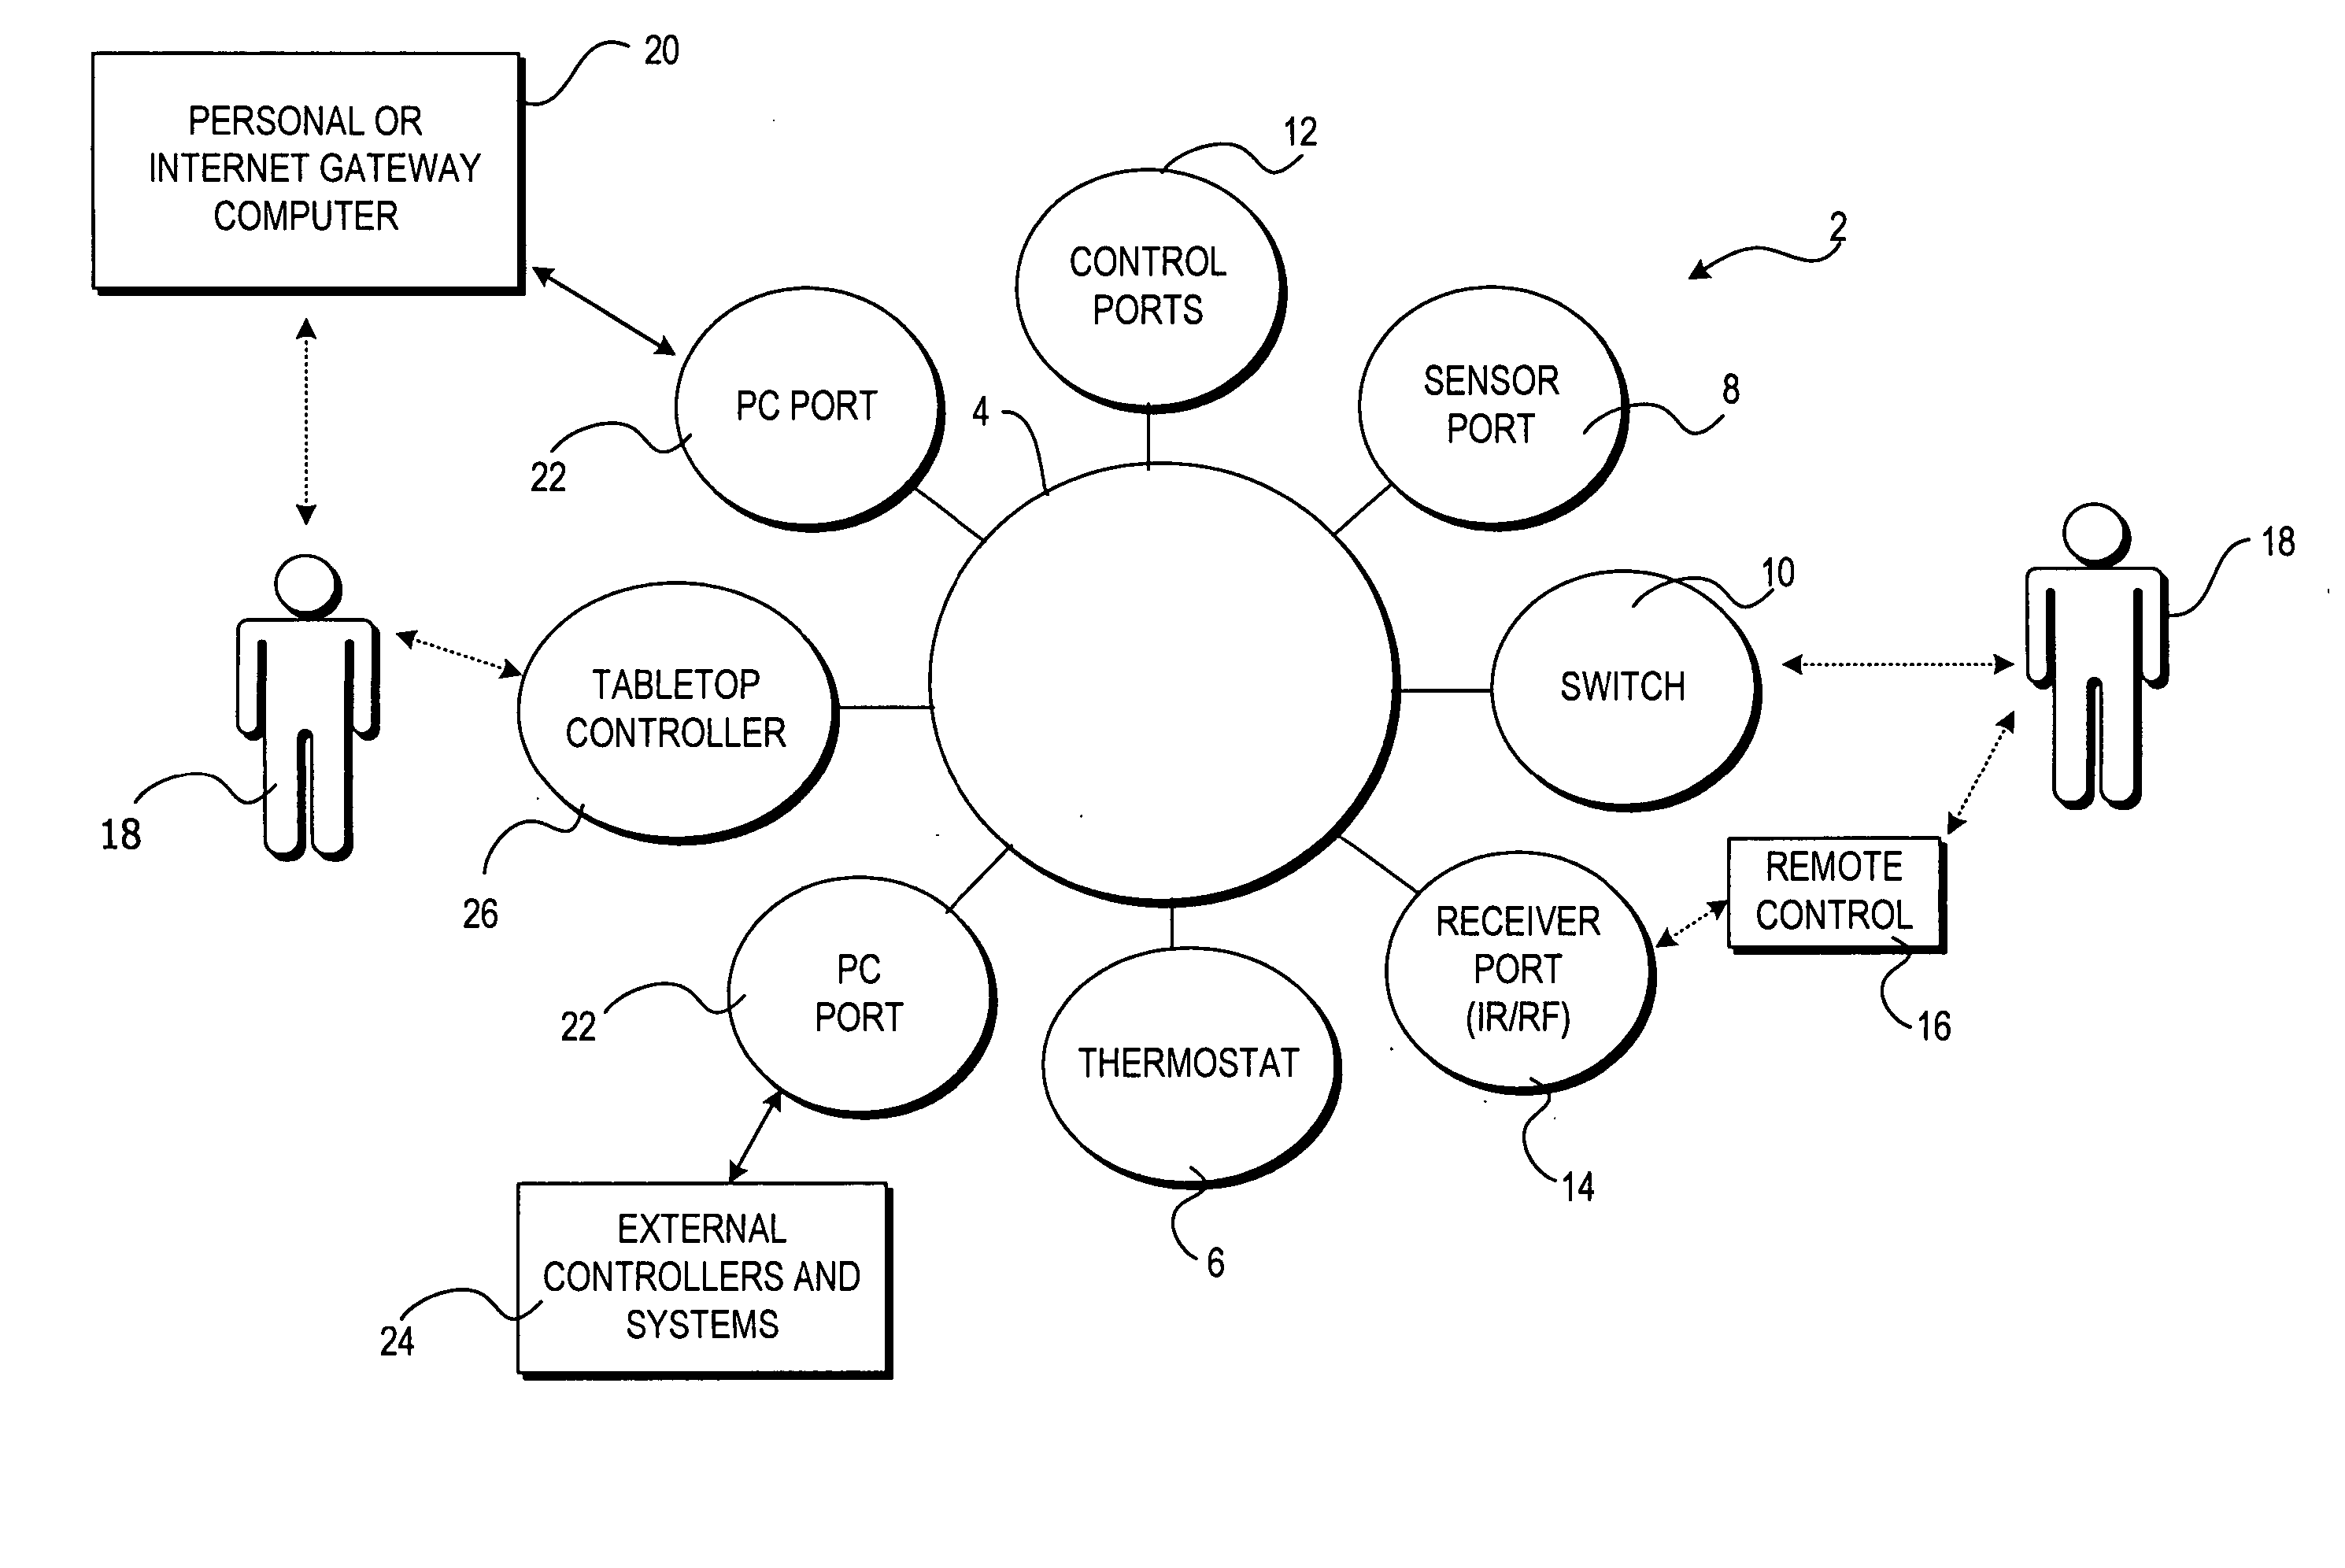 Method and apparatus for providing distributed scene programming of a home automation and control system